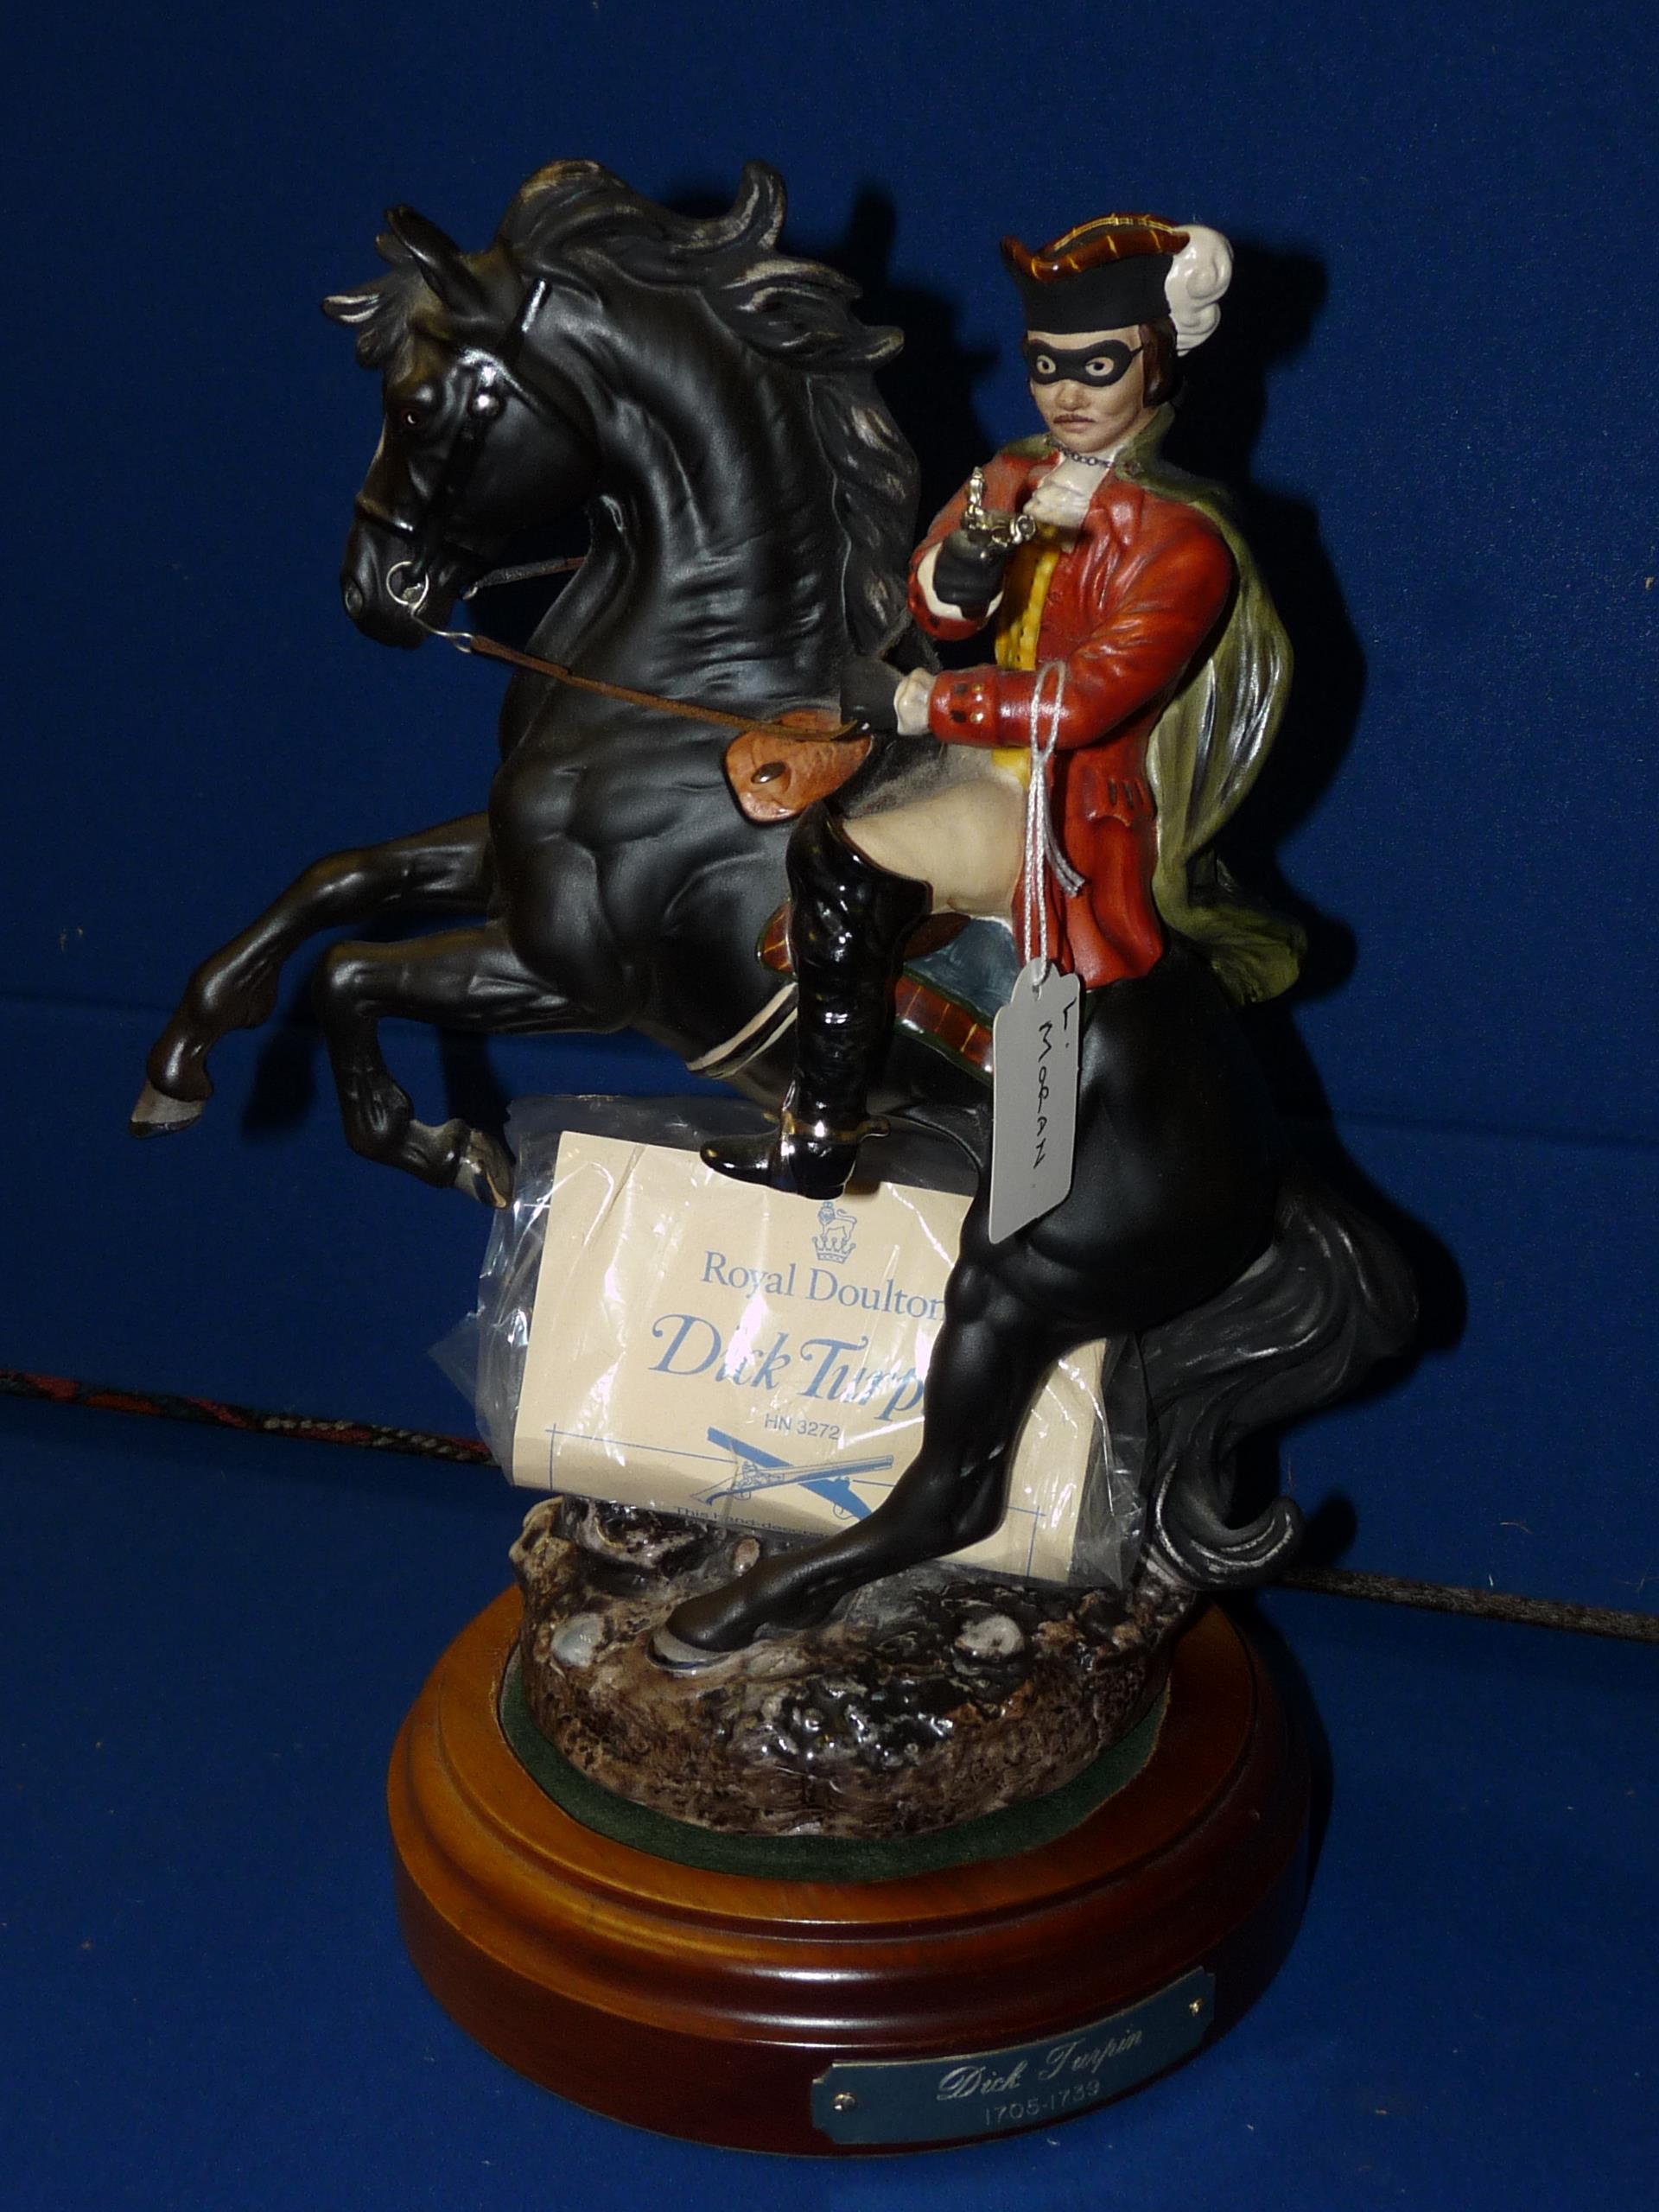 Limited Edition Royal Doulton Dick Turpin figure and stand